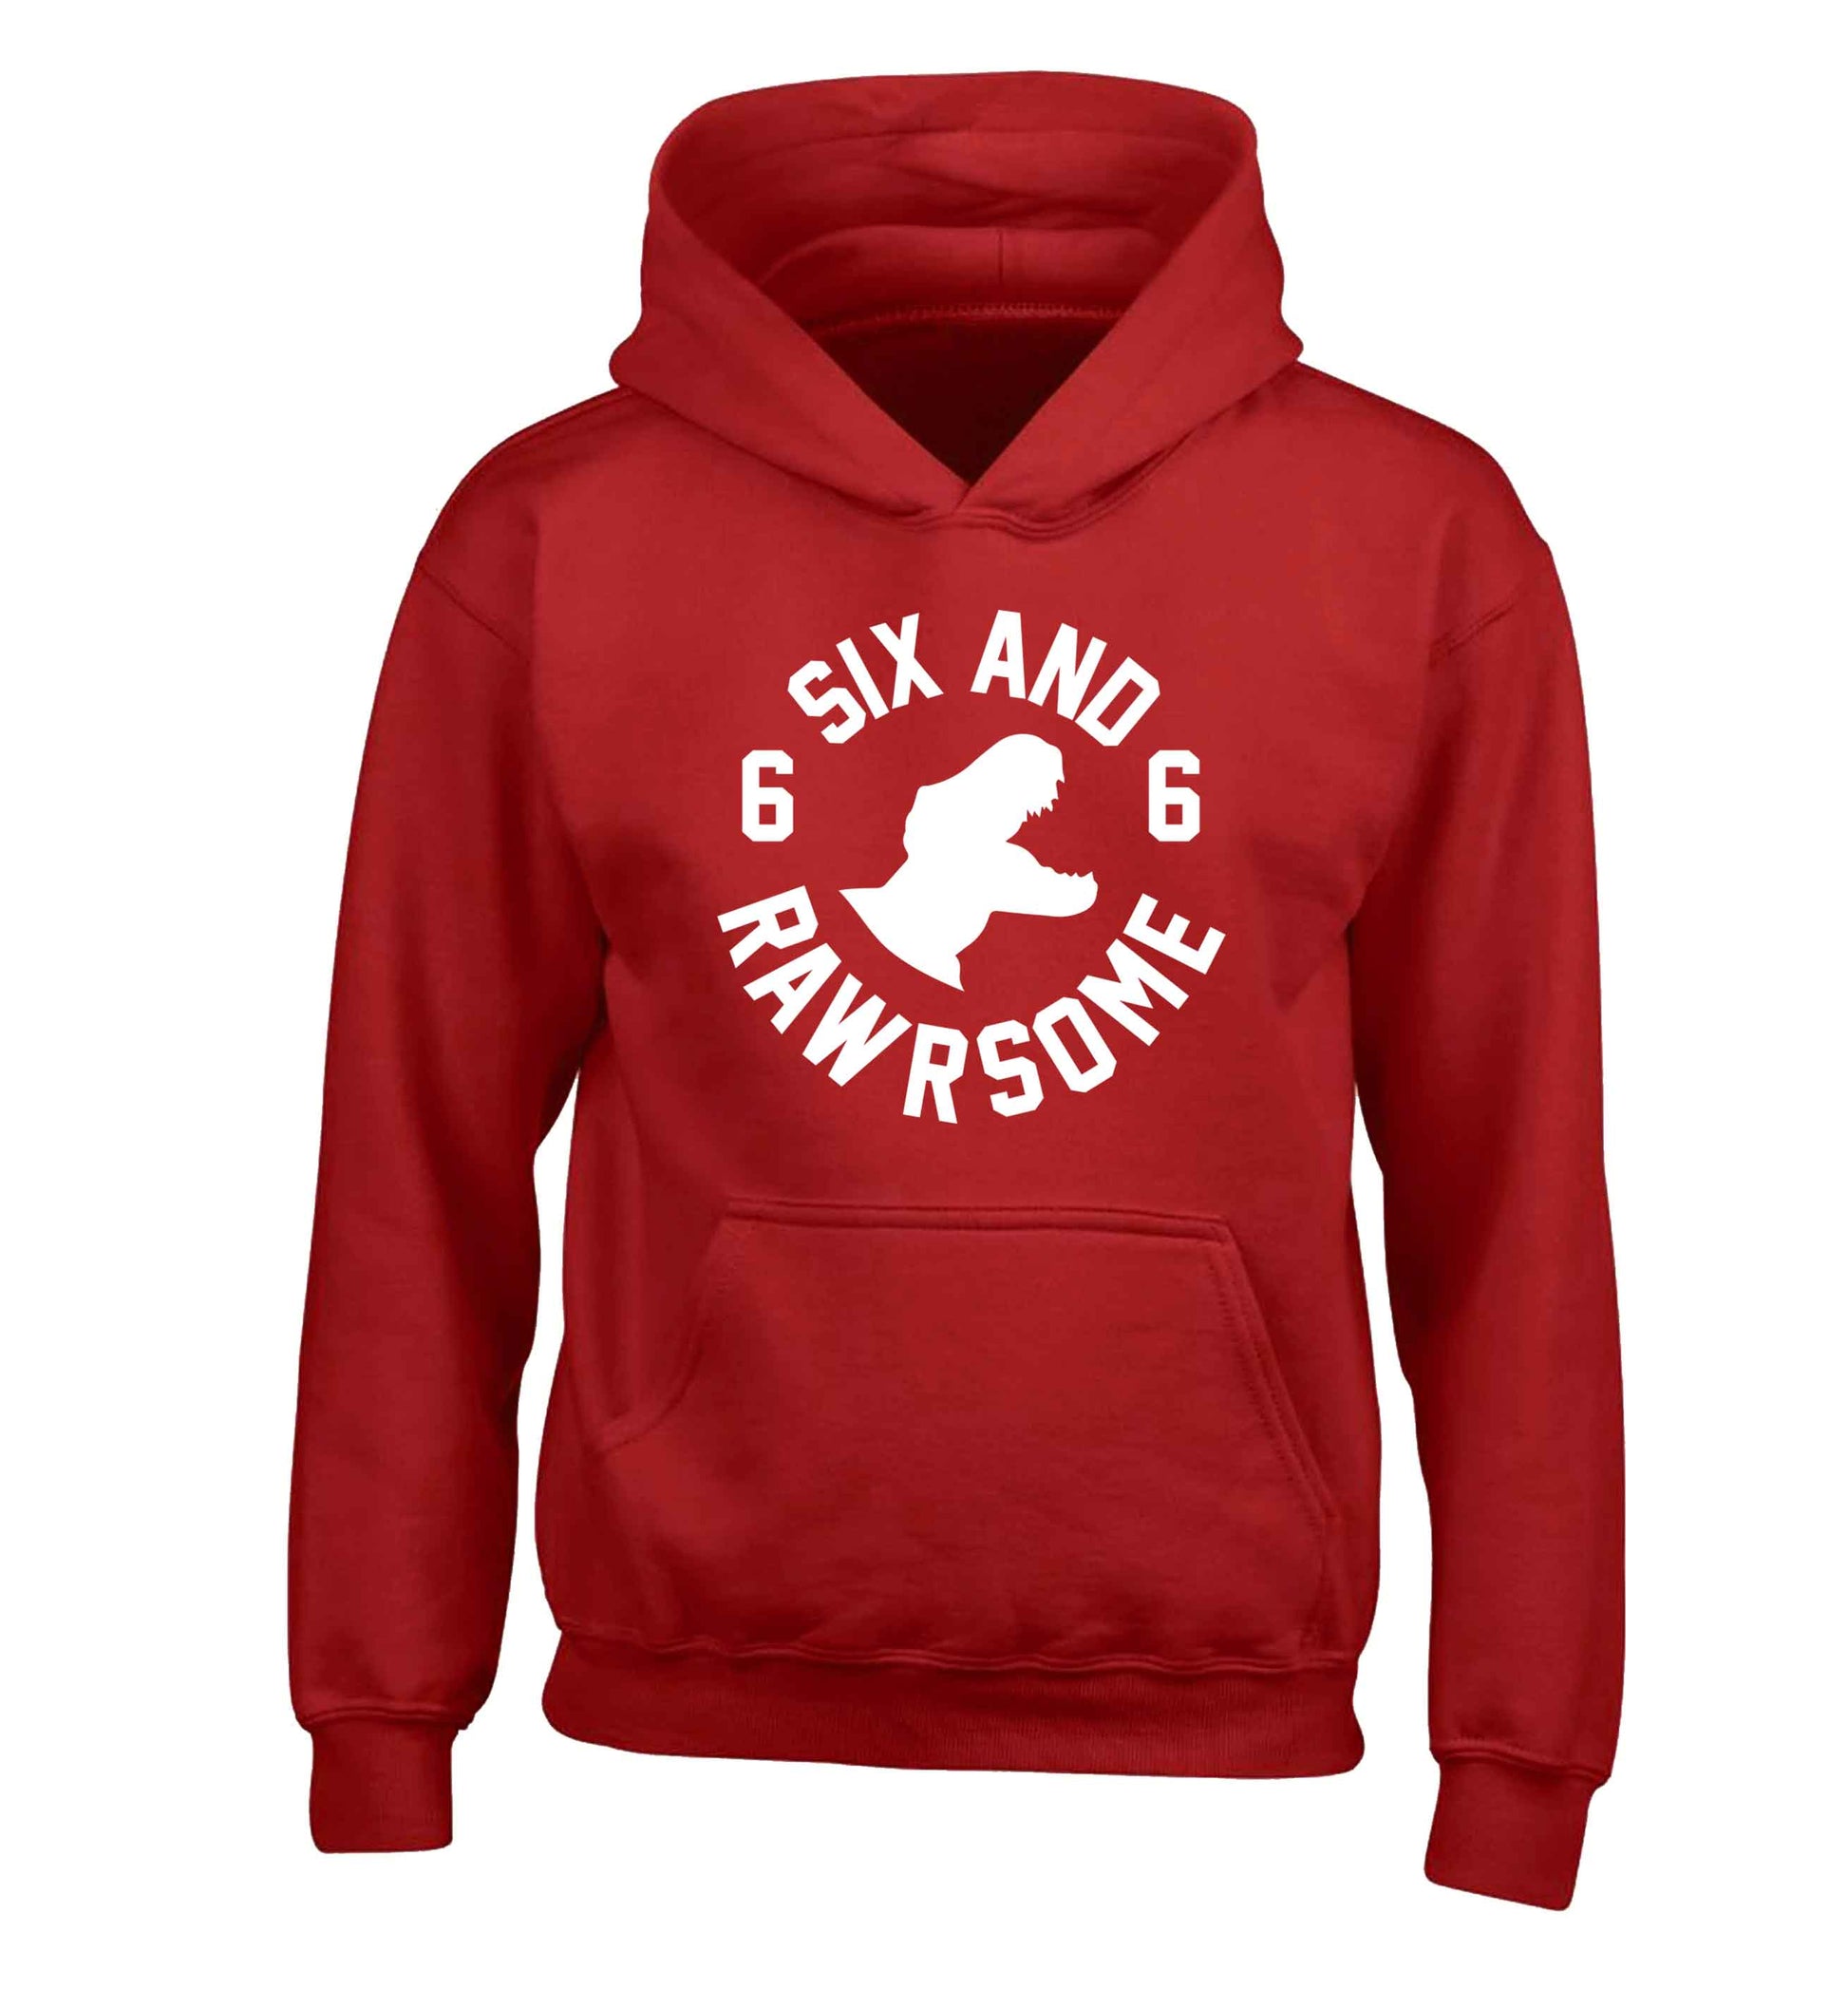 Six and rawrsome children's red hoodie 12-13 Years